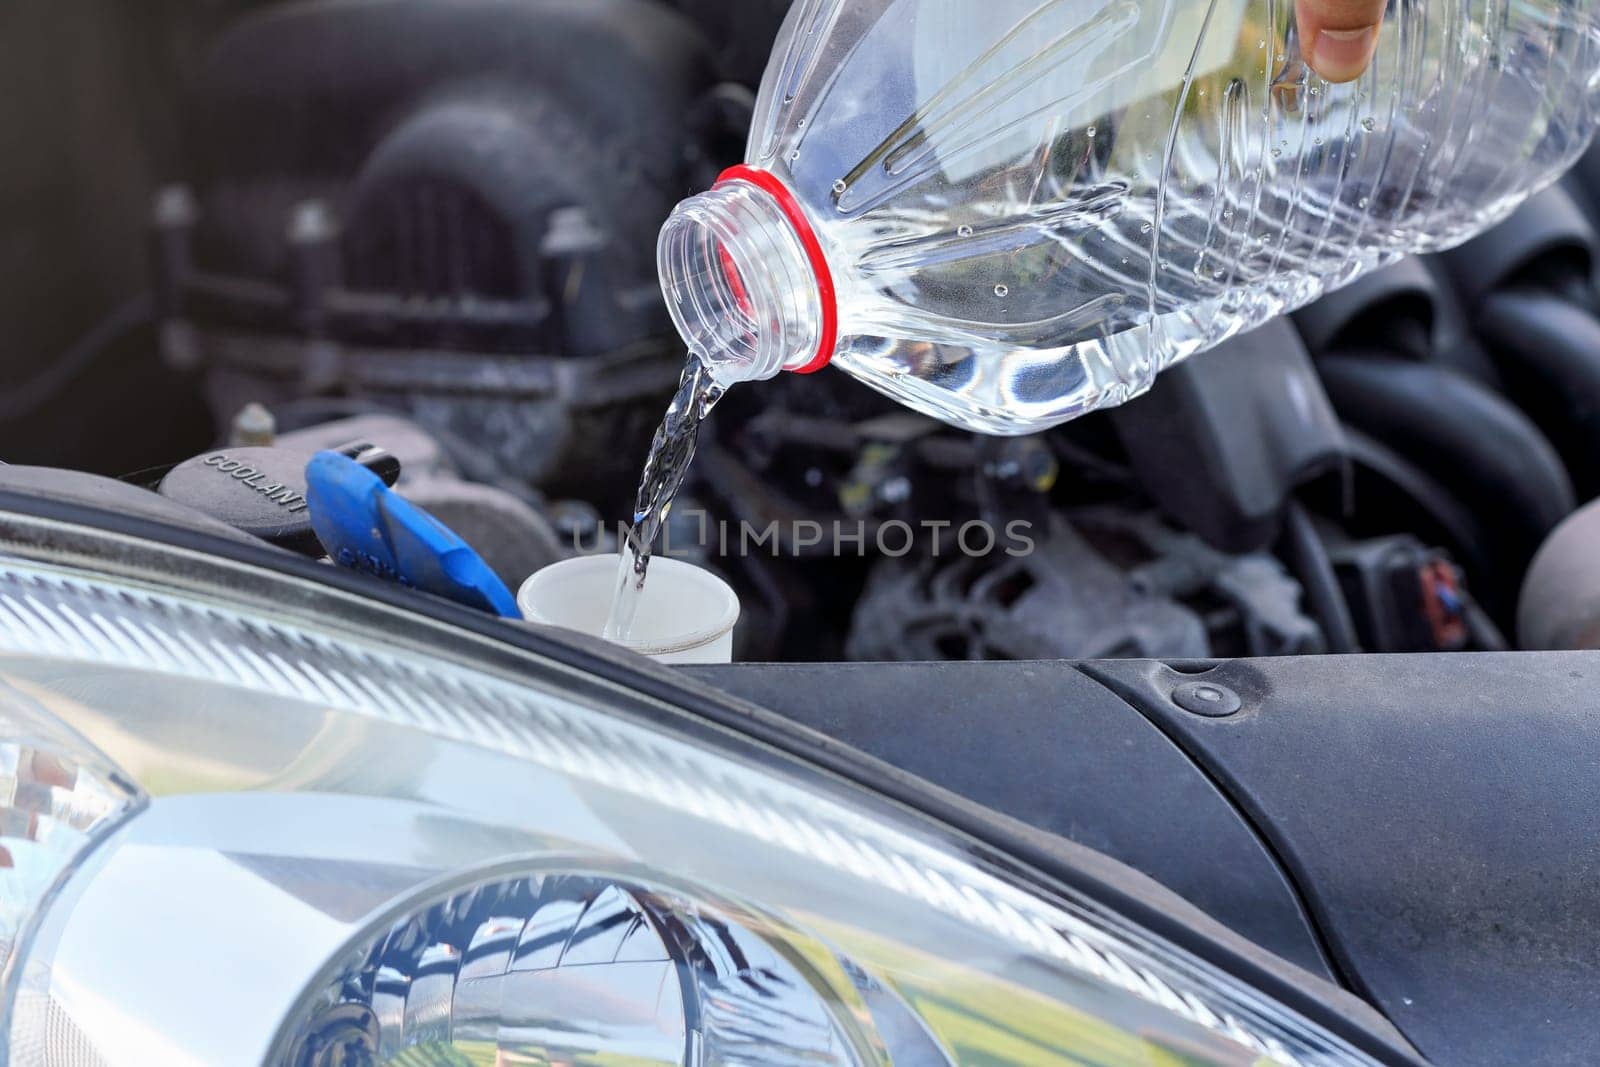 Pouring distilled water (ecological alternative to washing fluid) to washer tank in car, detail on liquid flowing from clear plastic bottle by Ivanko